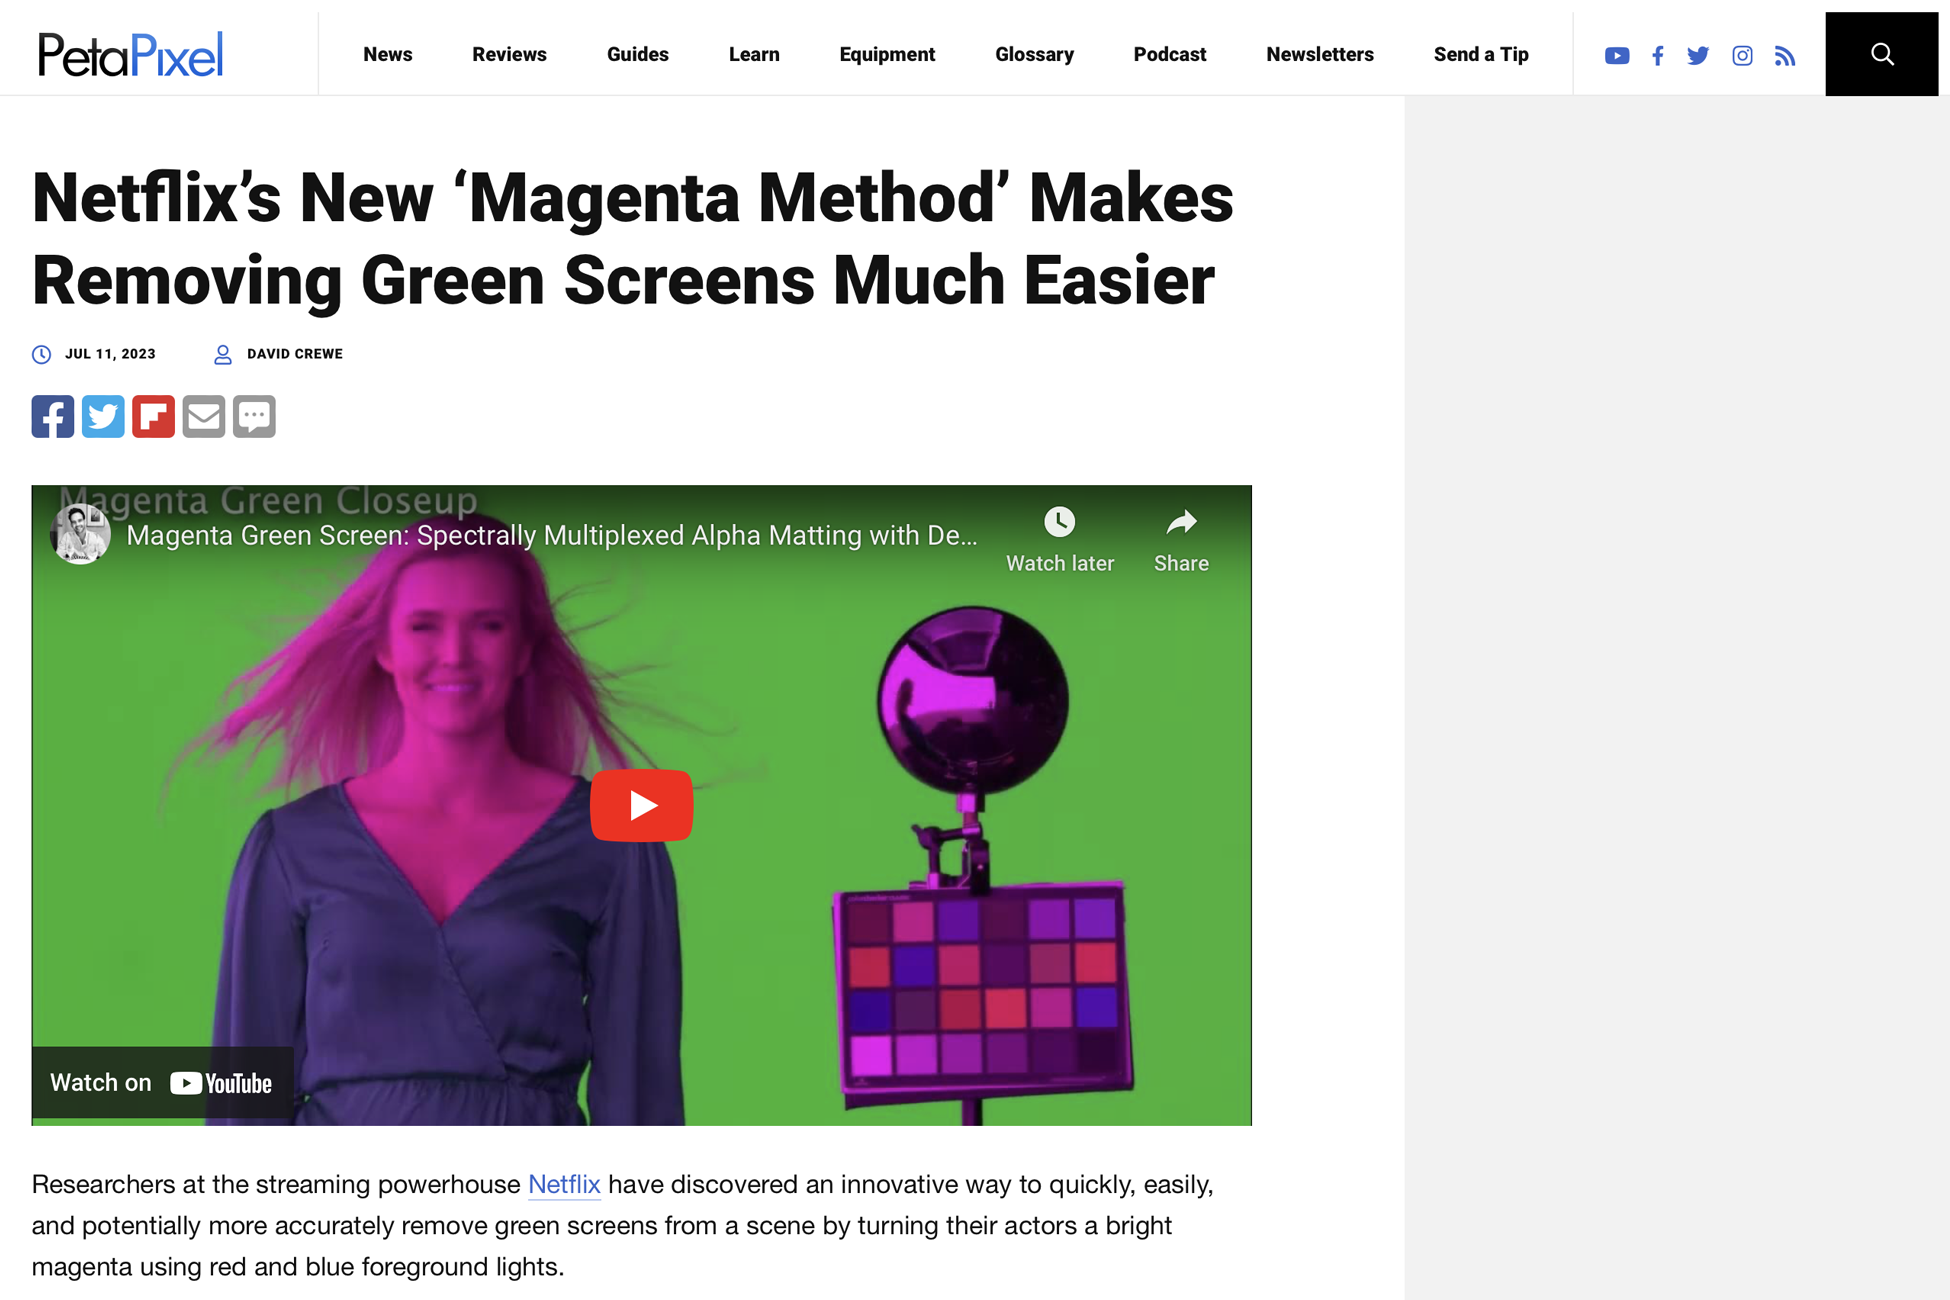 Netflix’s New ‘Magenta Method’ Makes Removing Green Screens Much Easier